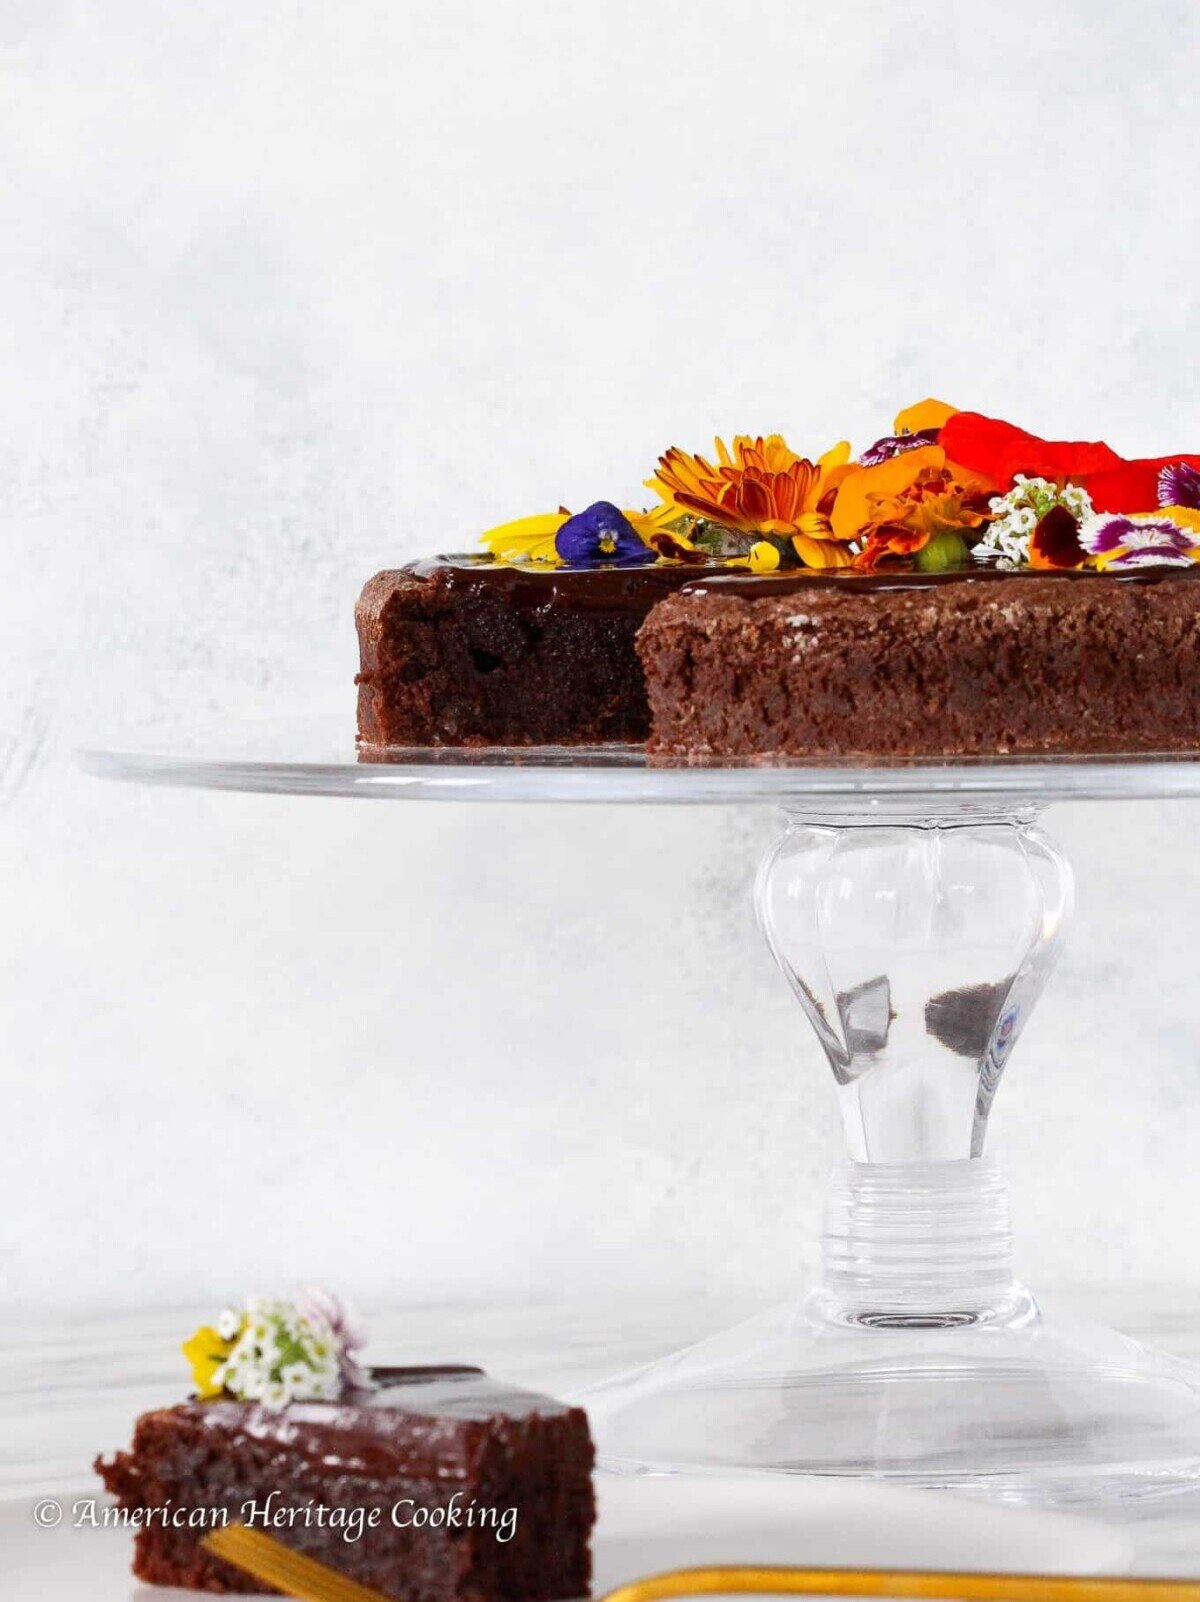 Flourless Chocolate Torte on a clear cake stand for Valentine's Day Desserts.